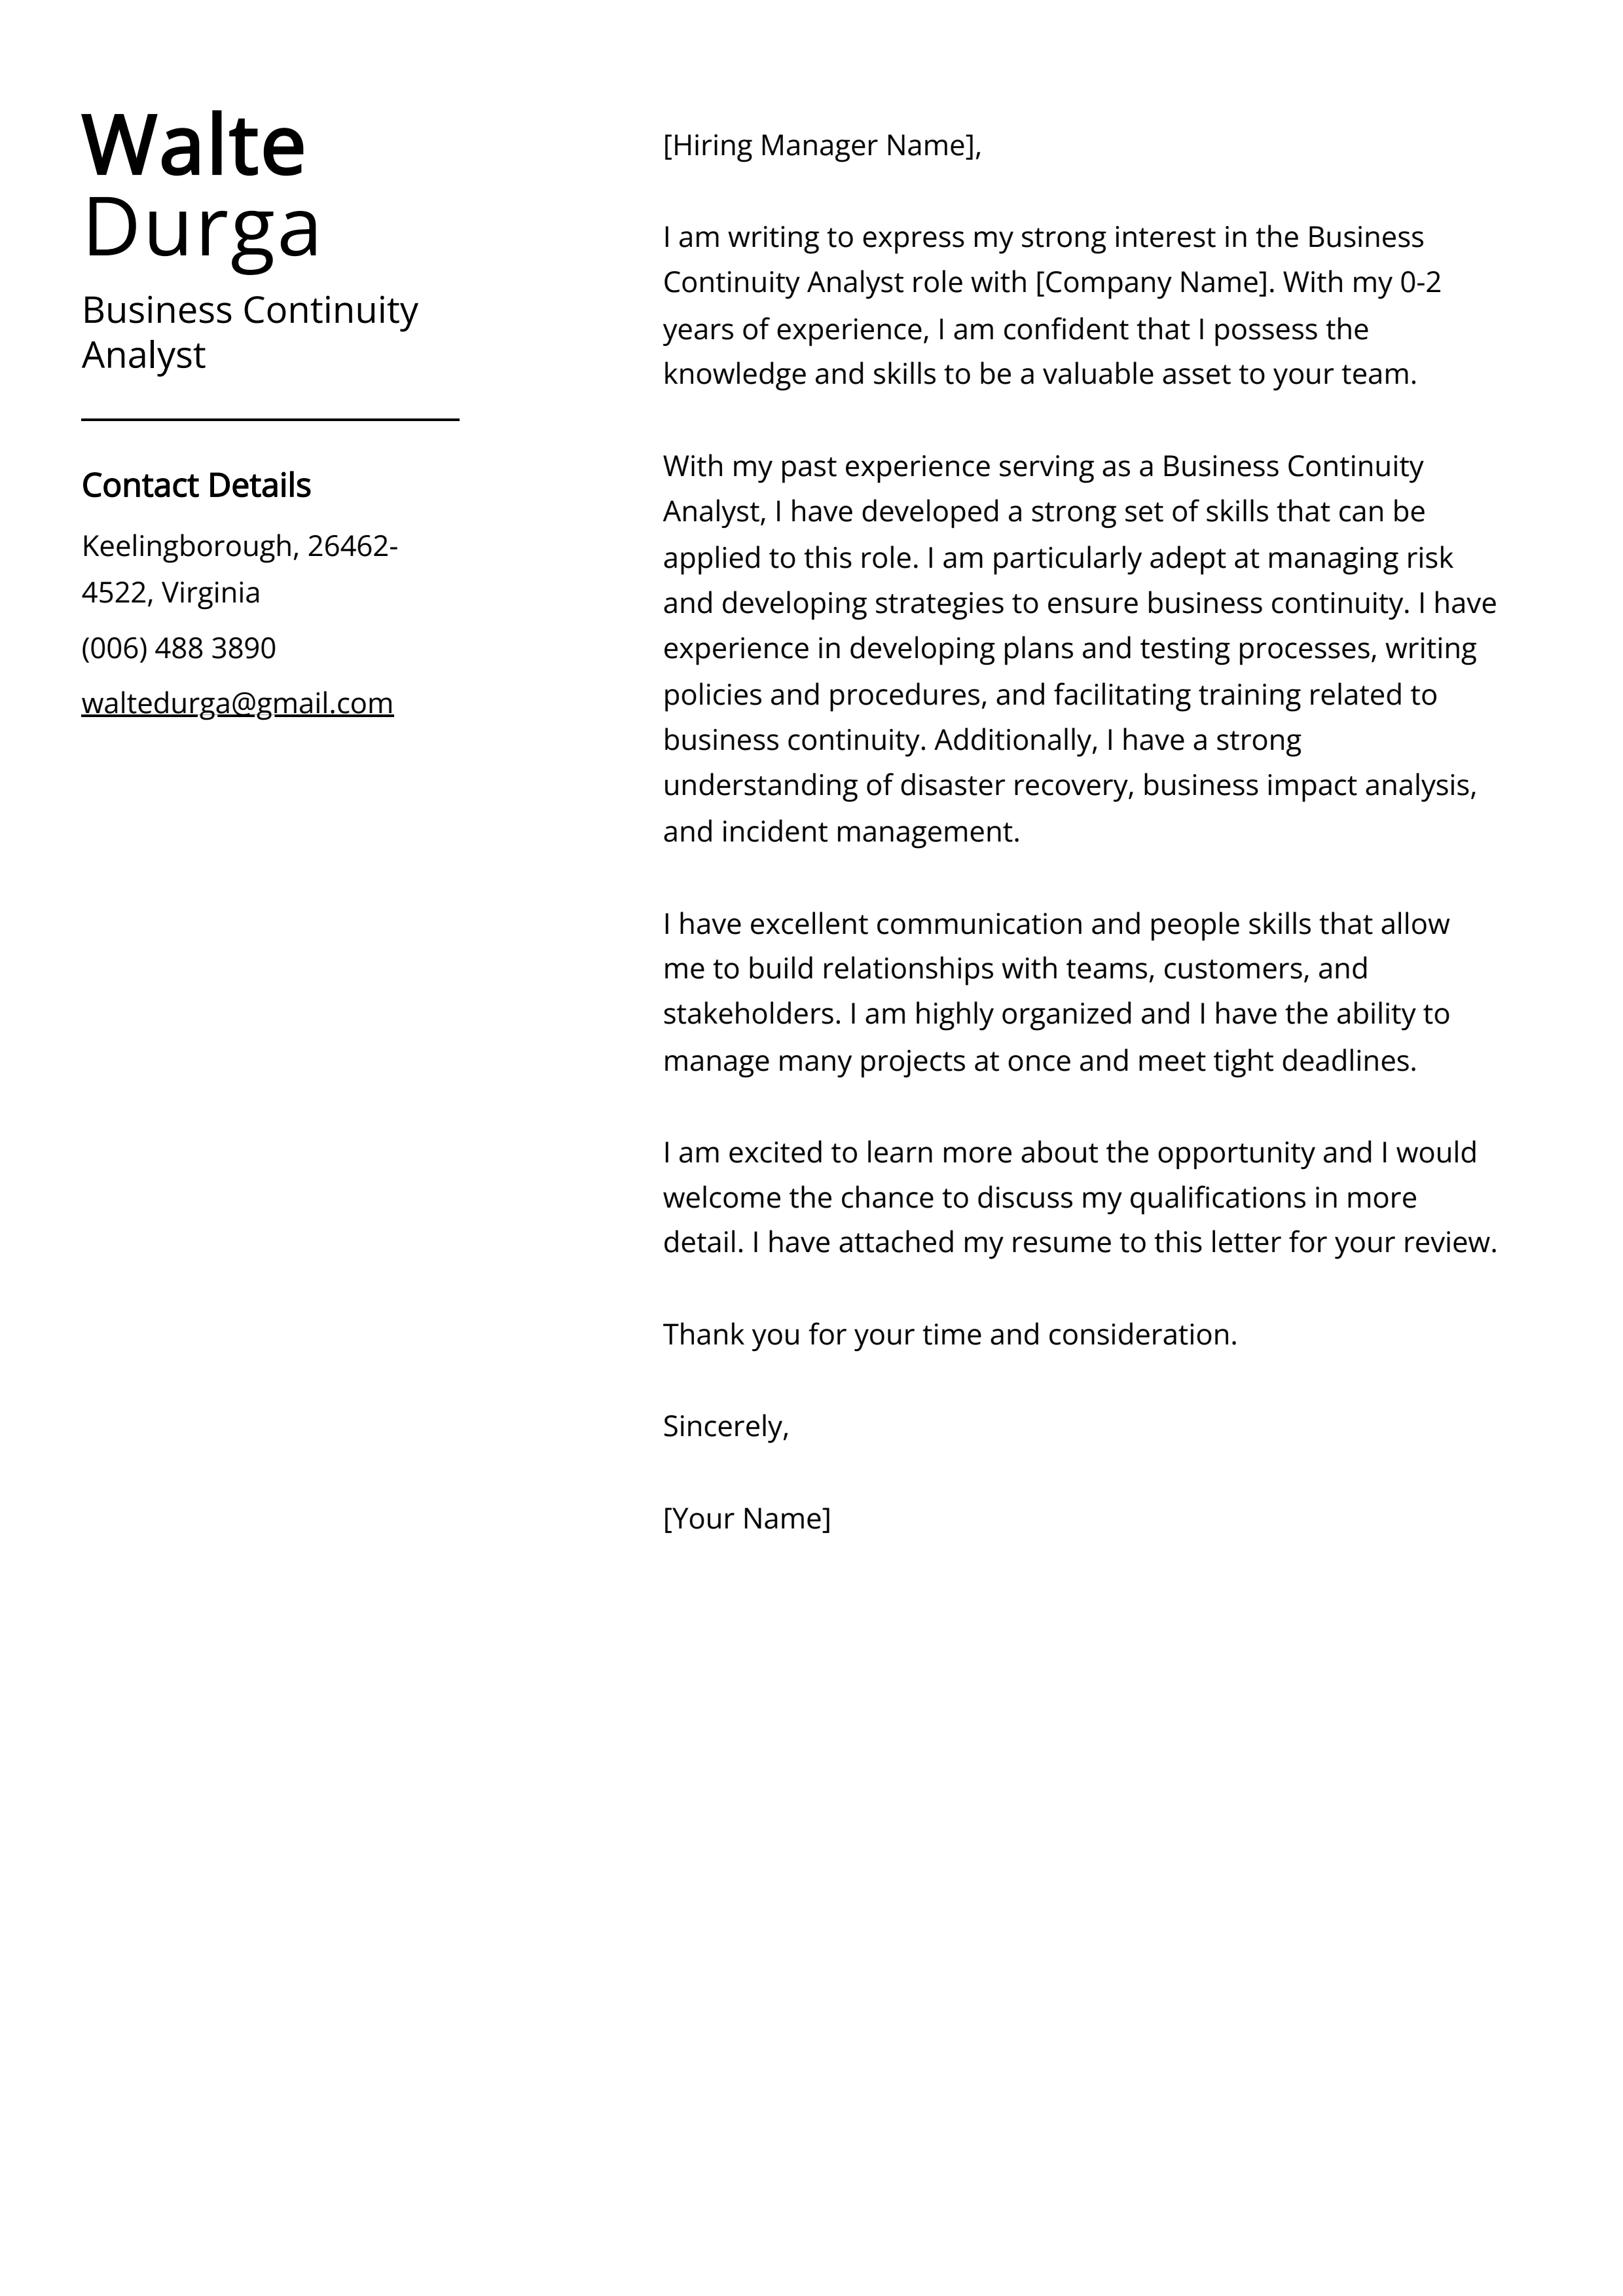 Business Continuity Analyst Cover Letter Example